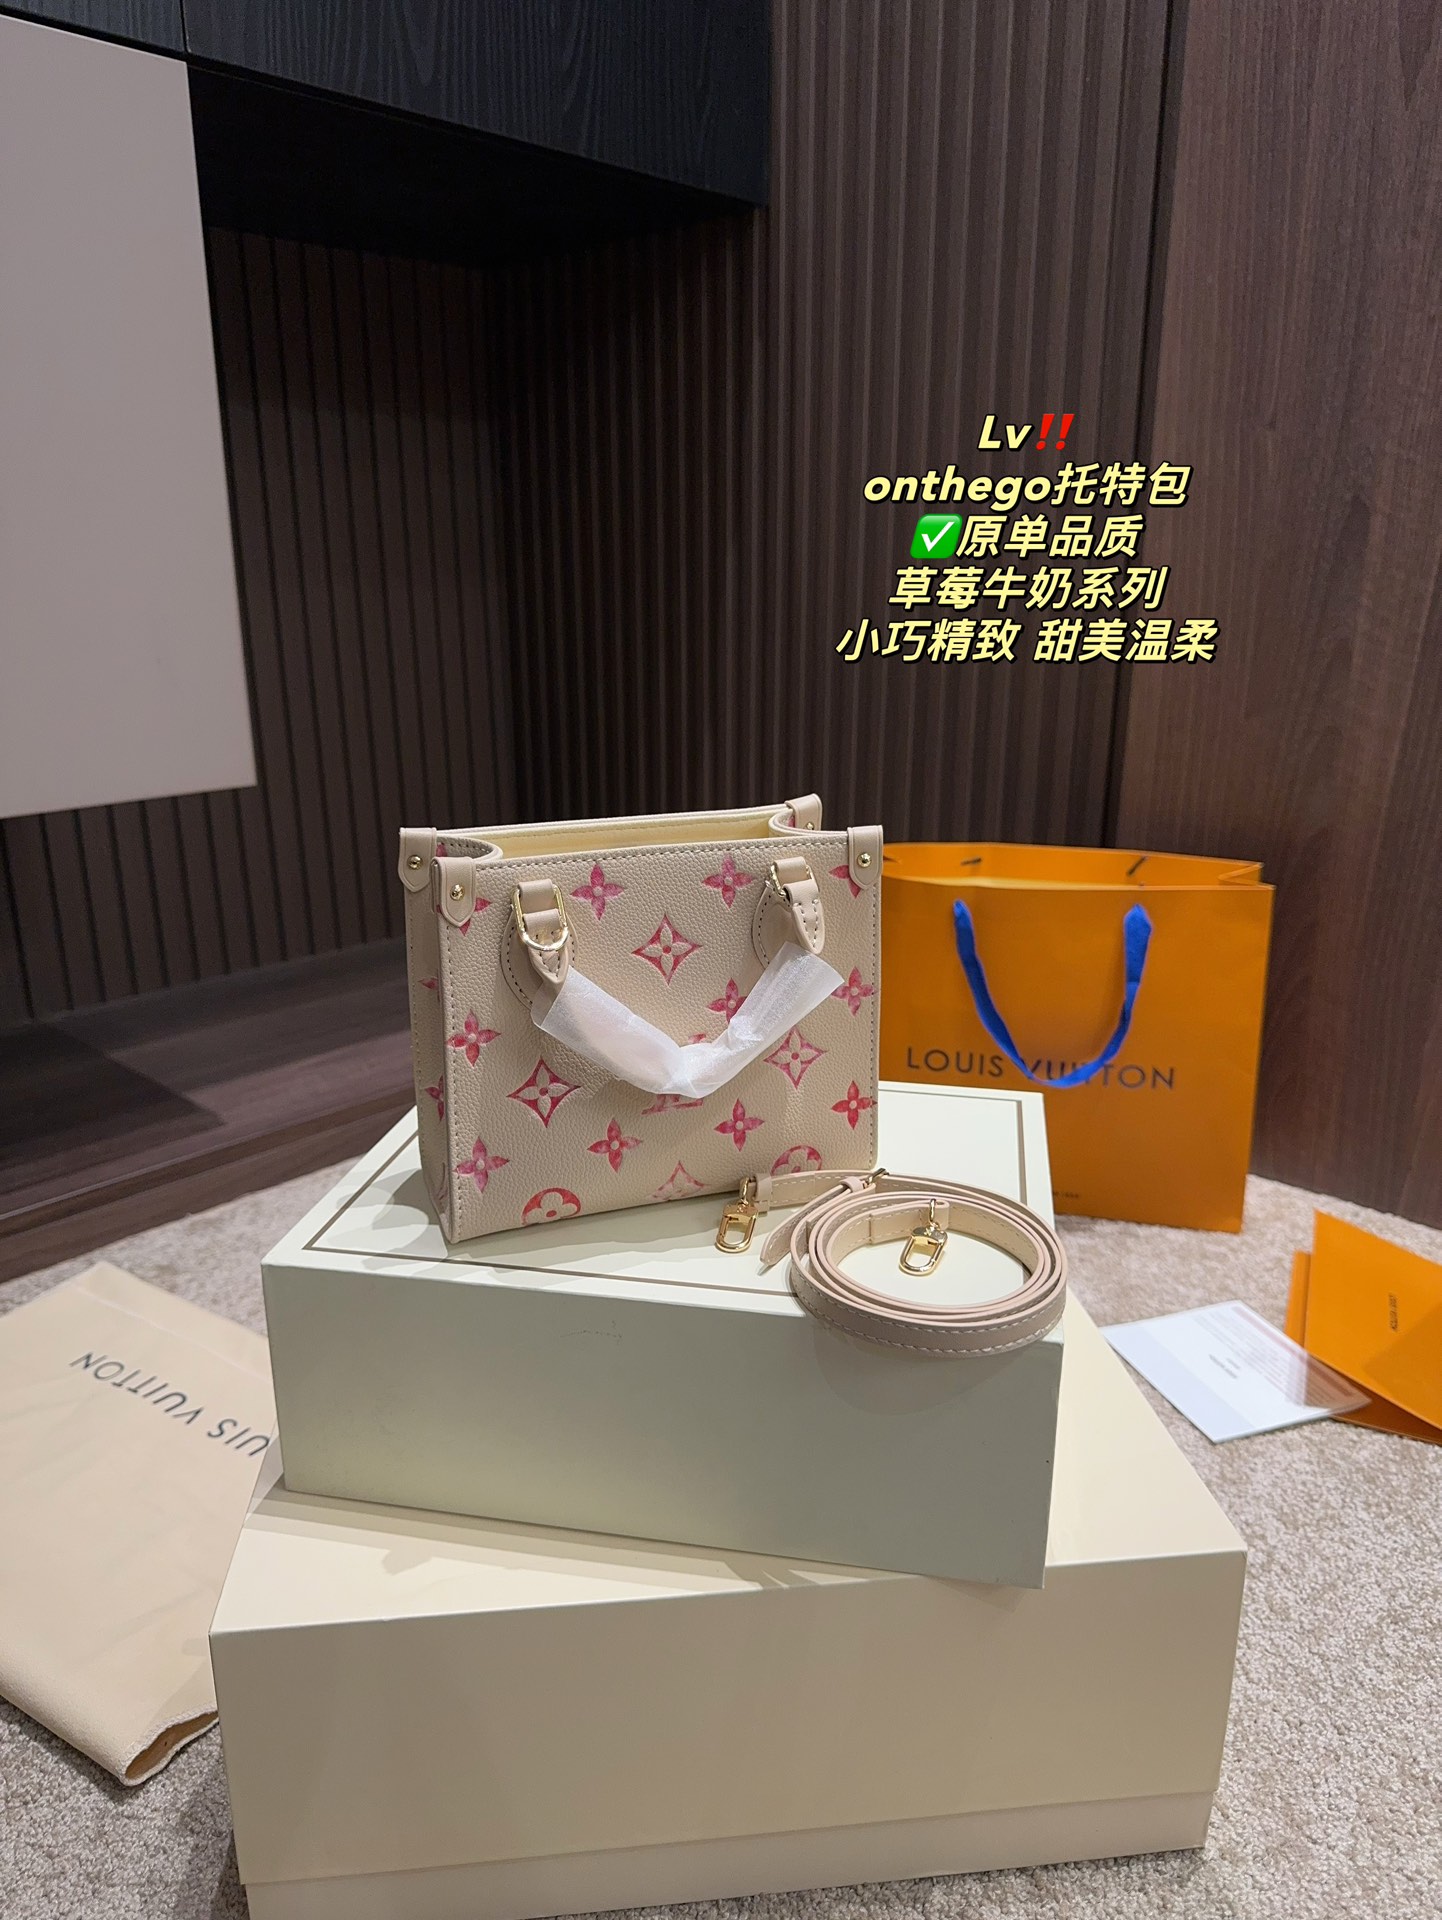 Louis Vuitton LV Onthego Crossbody & Shoulder Bags Tote Bags